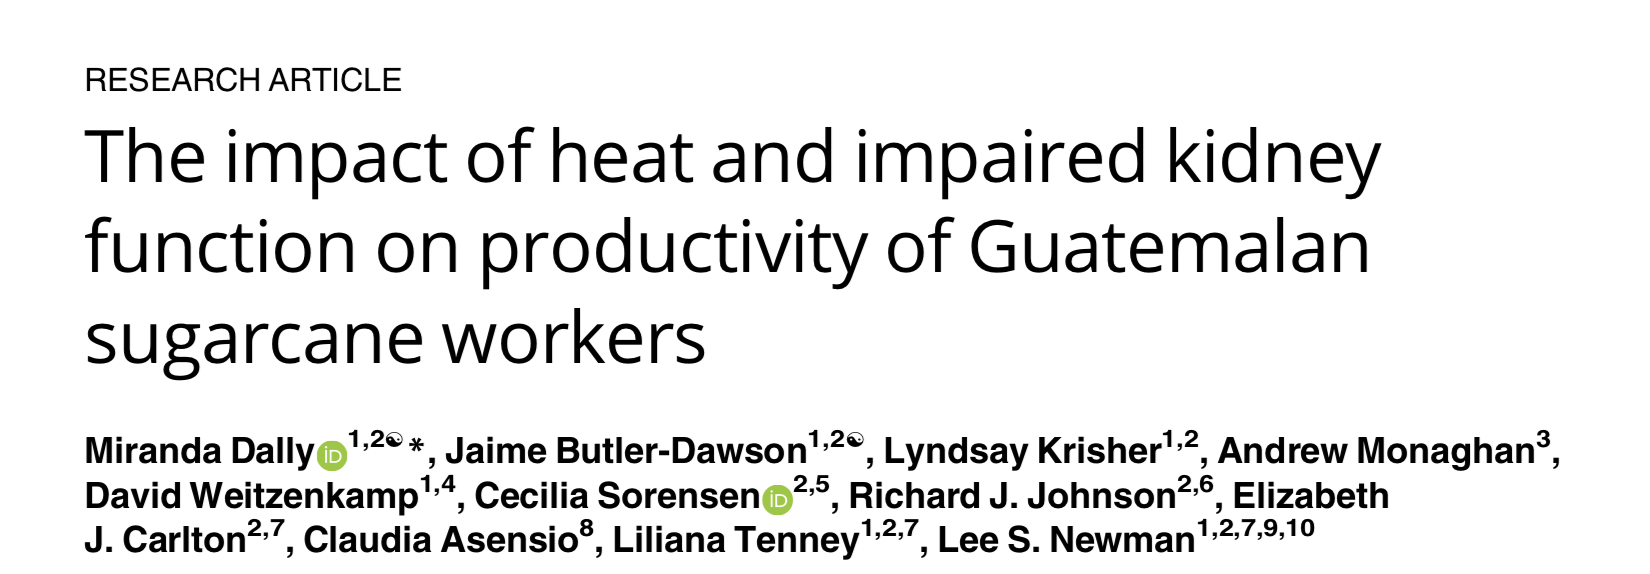 Dally et al. (2018): The impact of heat and impaired kidney function on productivity of Guatemalan sugarcane workers